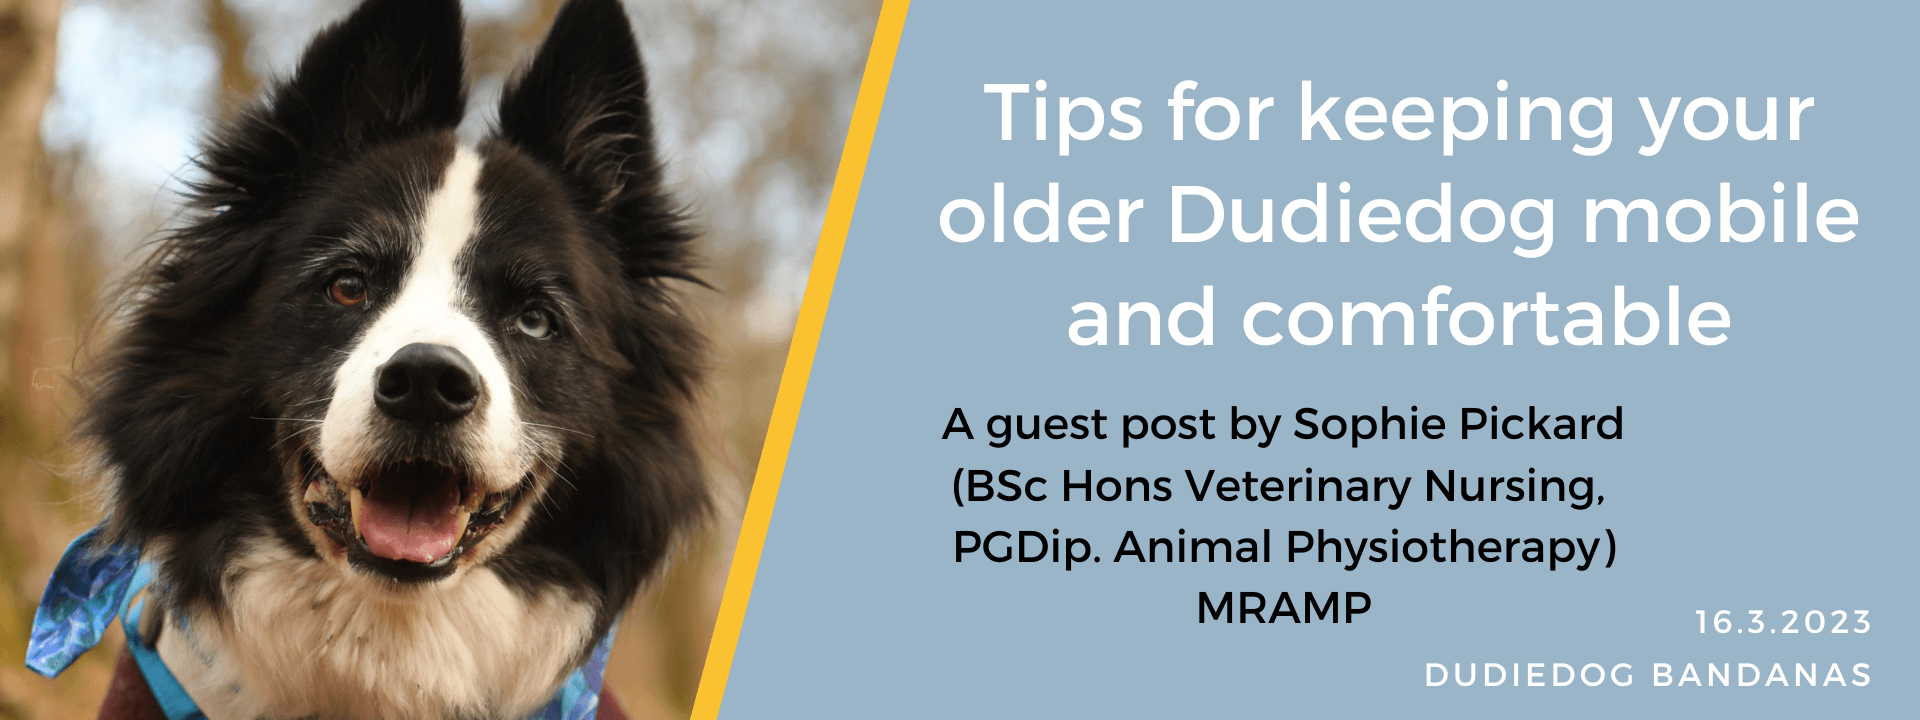 Tips for keeping your older Dudiedog Mobile and Comfortable